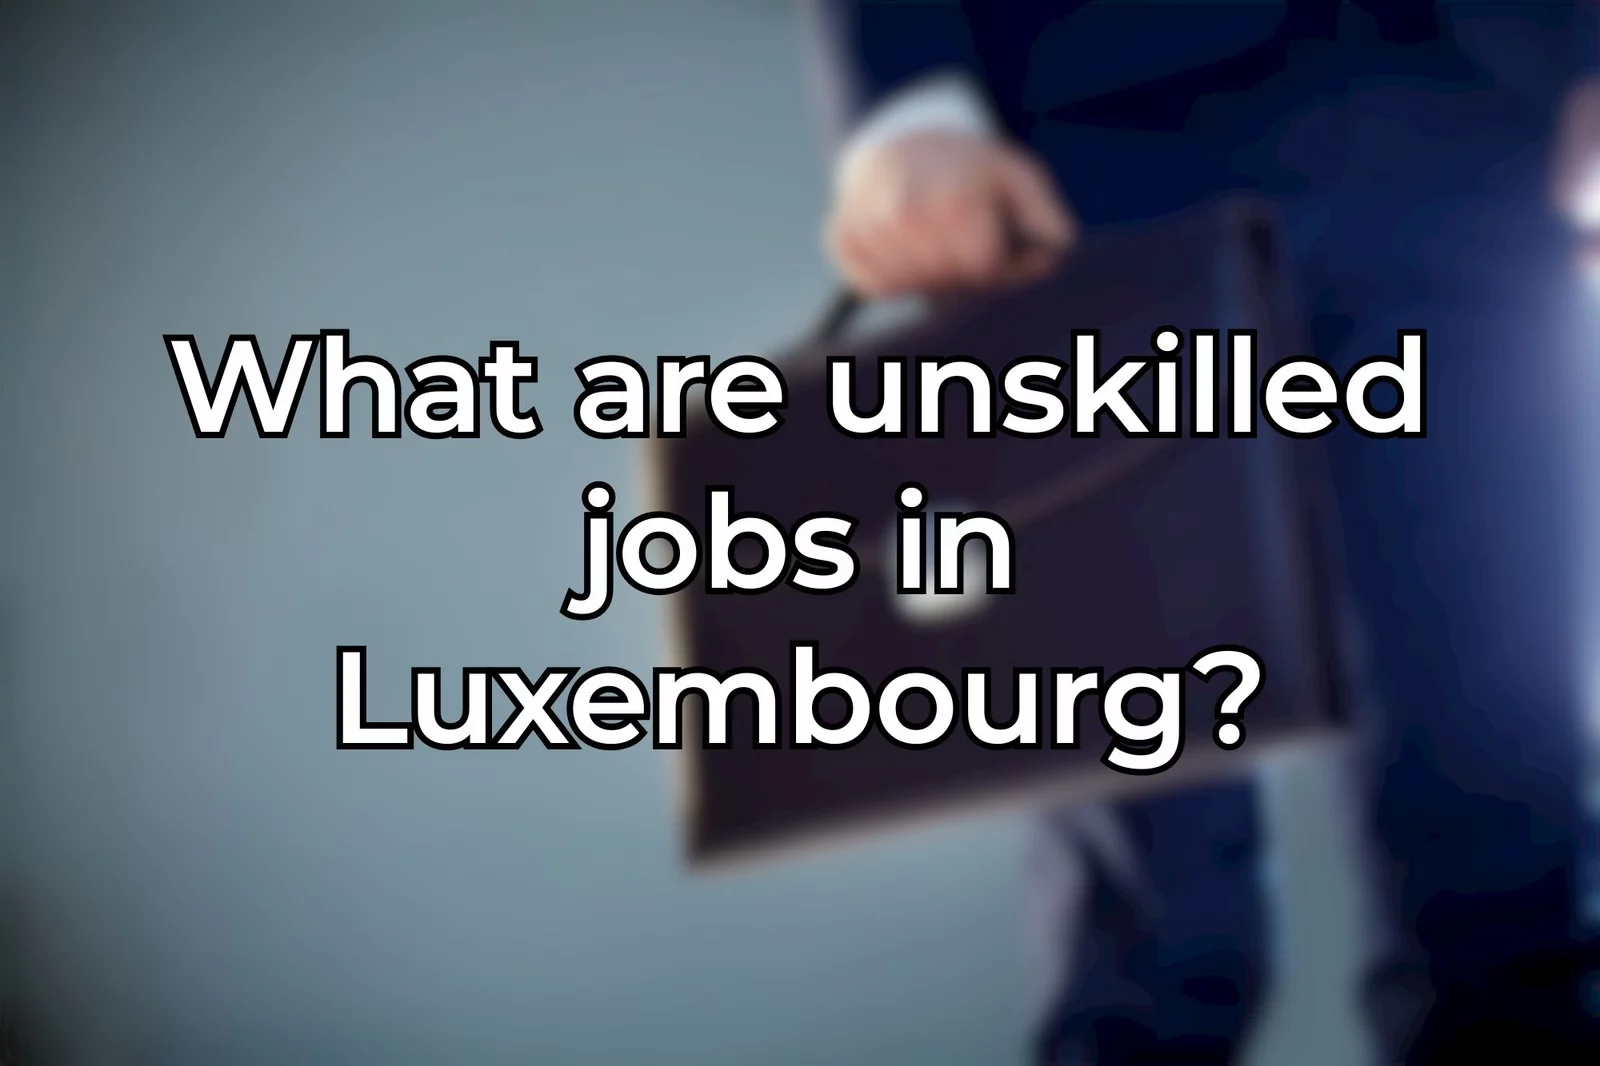 What are unskilled jobs in Luxembourg?